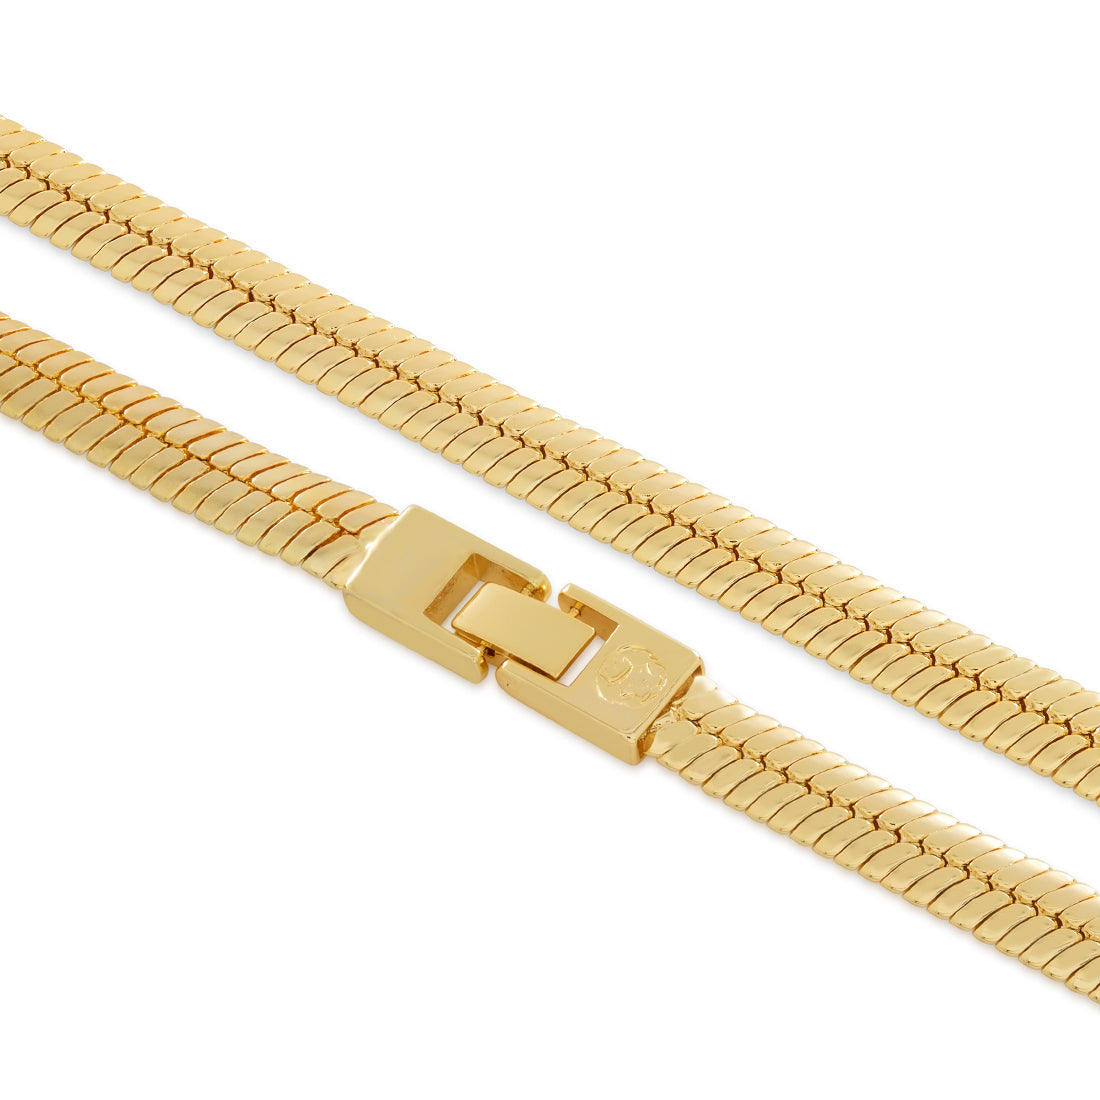 18k Yellow Gold Filled Herringbone Chain Necklace For Men Classic Solid  Accessory, 23.6 Inches Length From Blingfashion, $16.09 | DHgate.Com